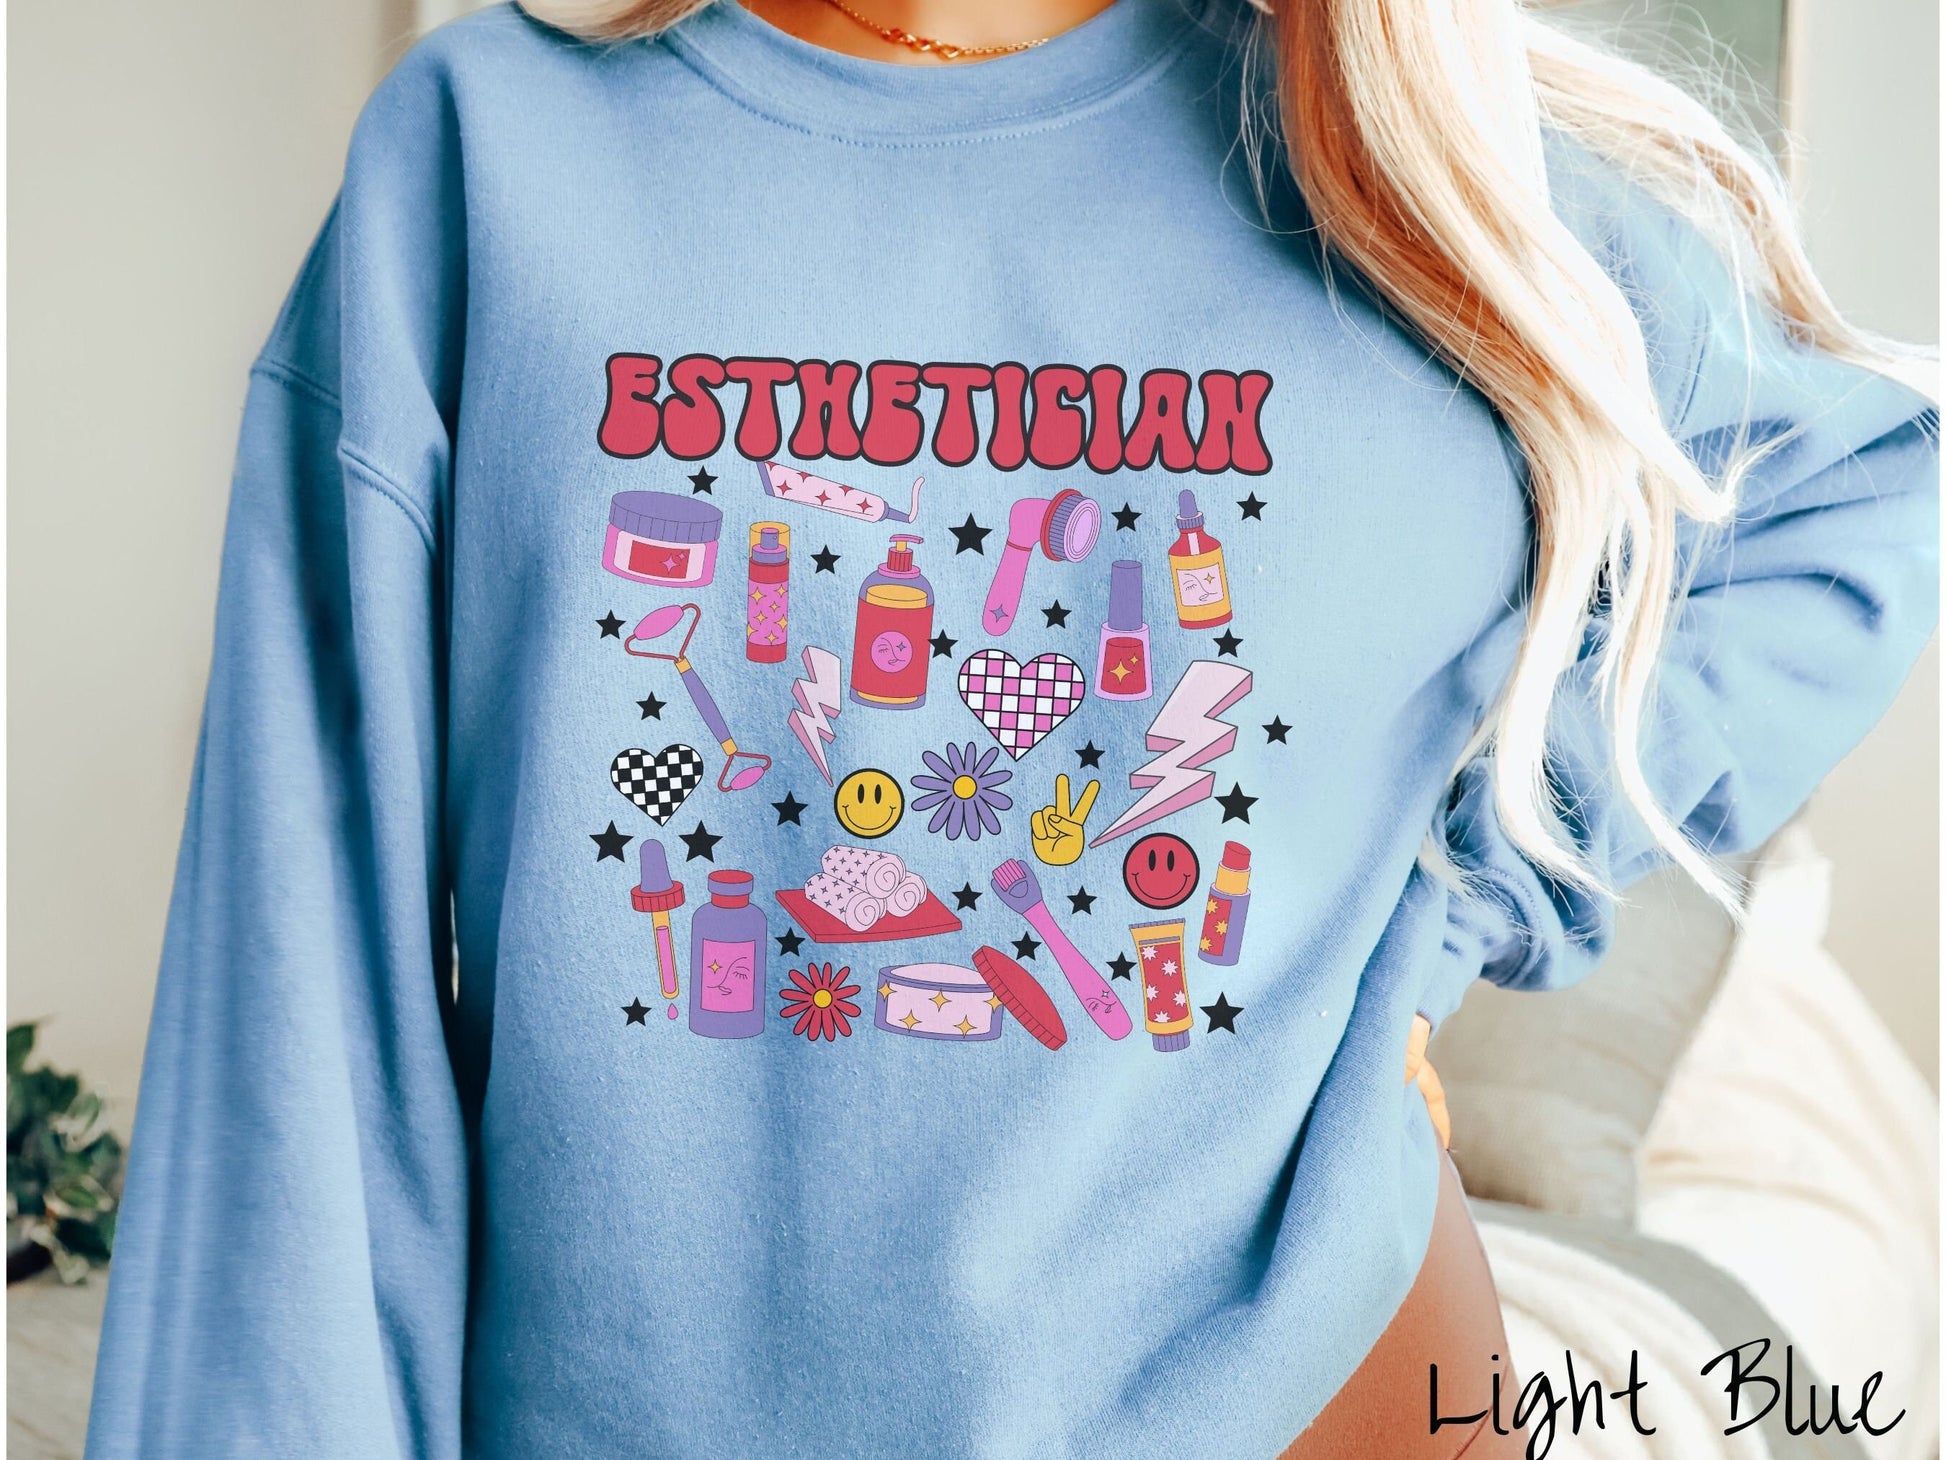 A woman wearing a cute light blue colored sweatshirt with the word Esthetician across the top and hair care items below like cream, rollers, hair care products, and droppers. Smiley faces, stars, and lightning bolts are spread out among the items.